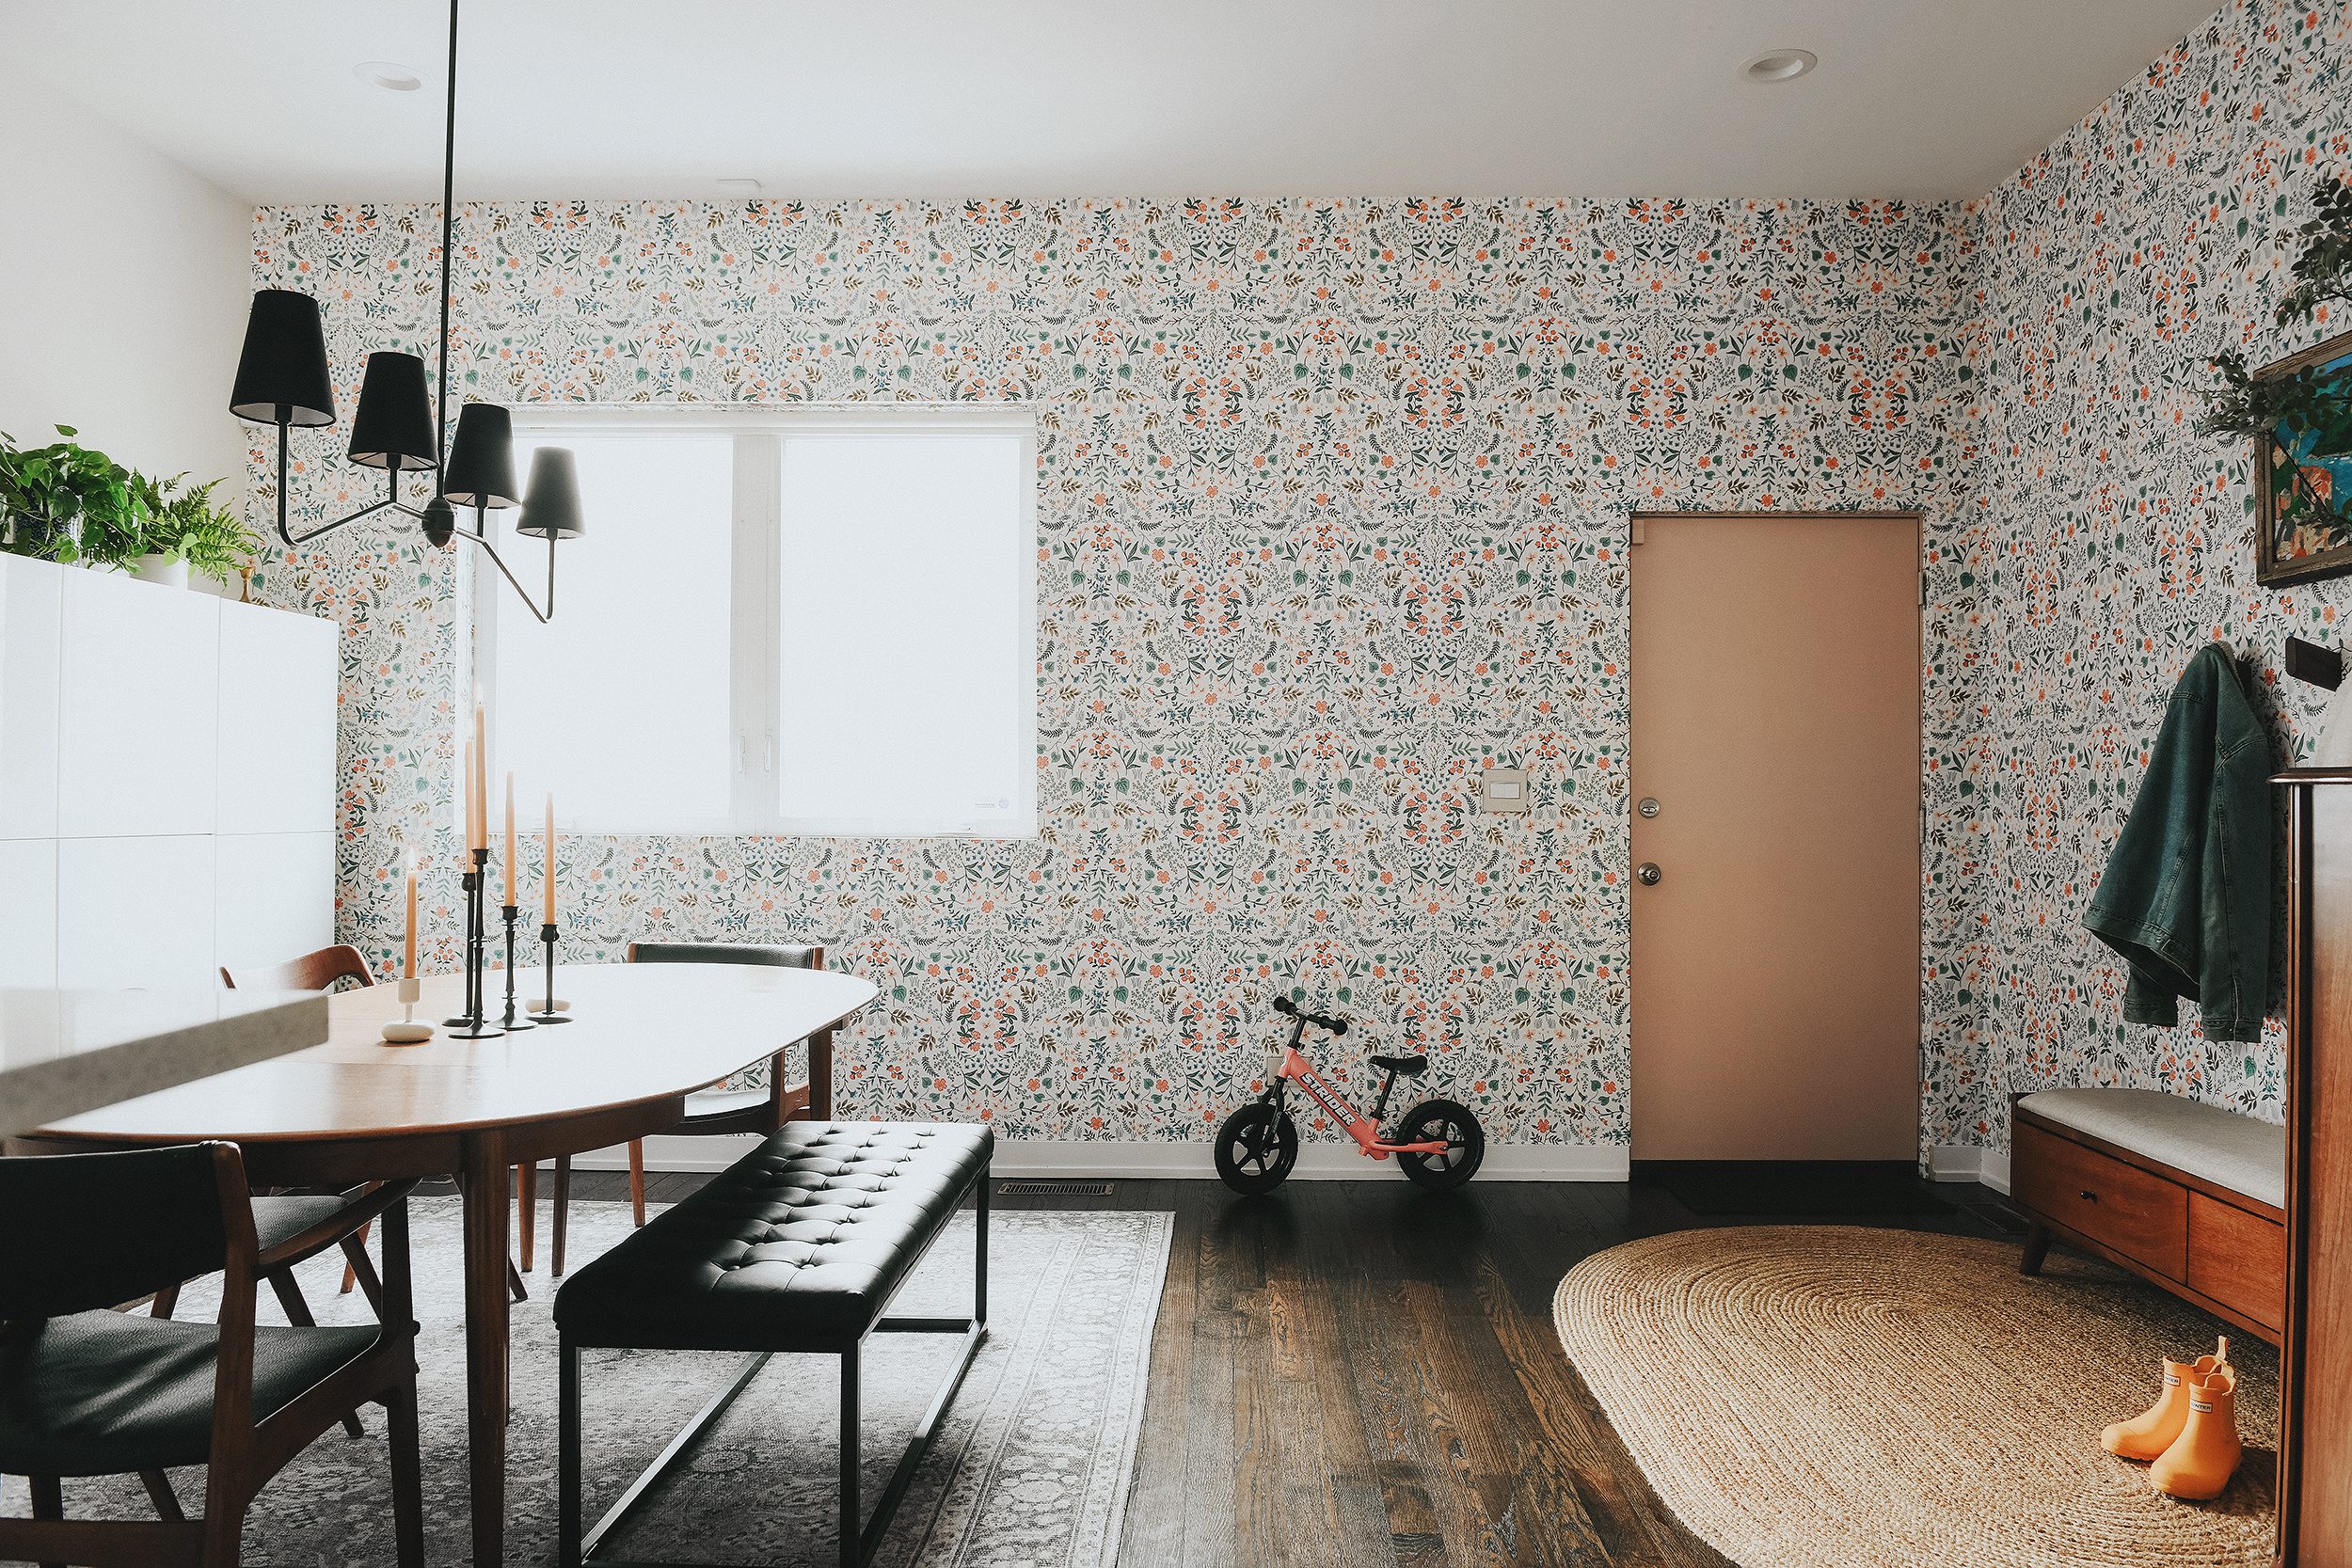 wallpaper wide view, used as an accent in a dining room | via Yellow Brick Home